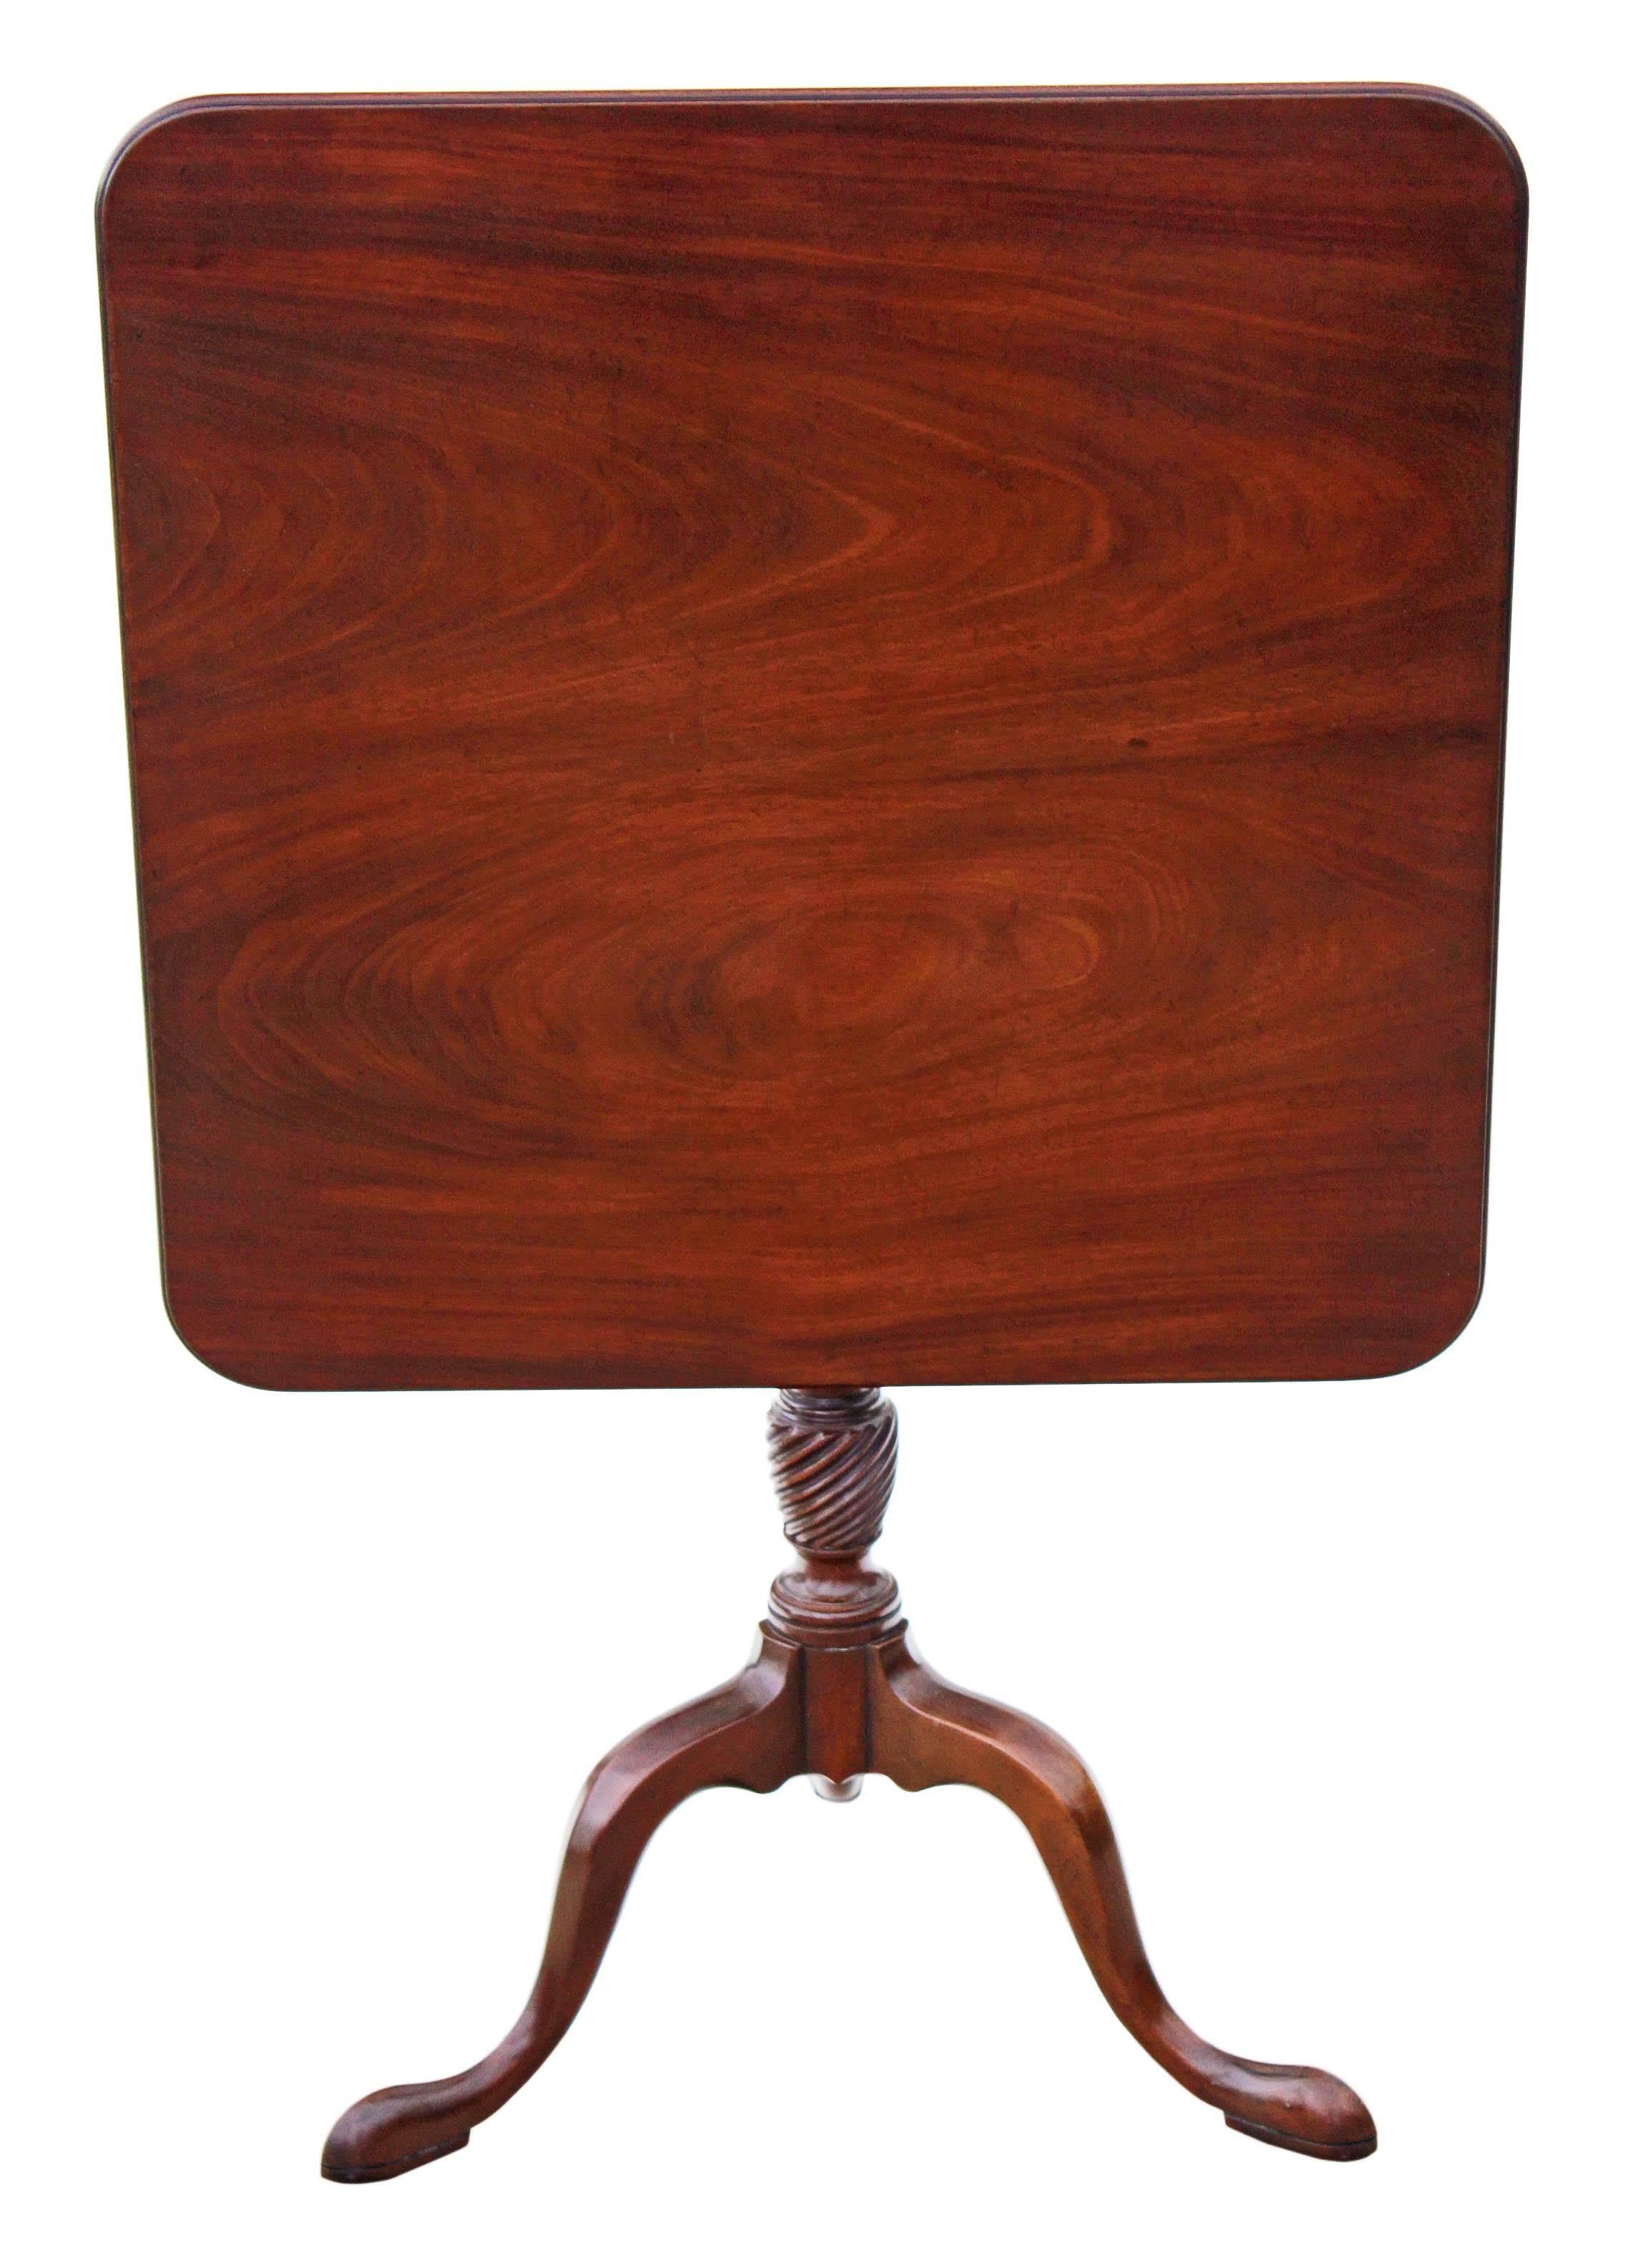 Antique quality Georgian style mahogany tilt-top supper occasional table.
Around 50 years old, this is a very good quality reproduction table made from solid mahogany by Kittinger Co.

Very attractive, with a quality two plank top and a